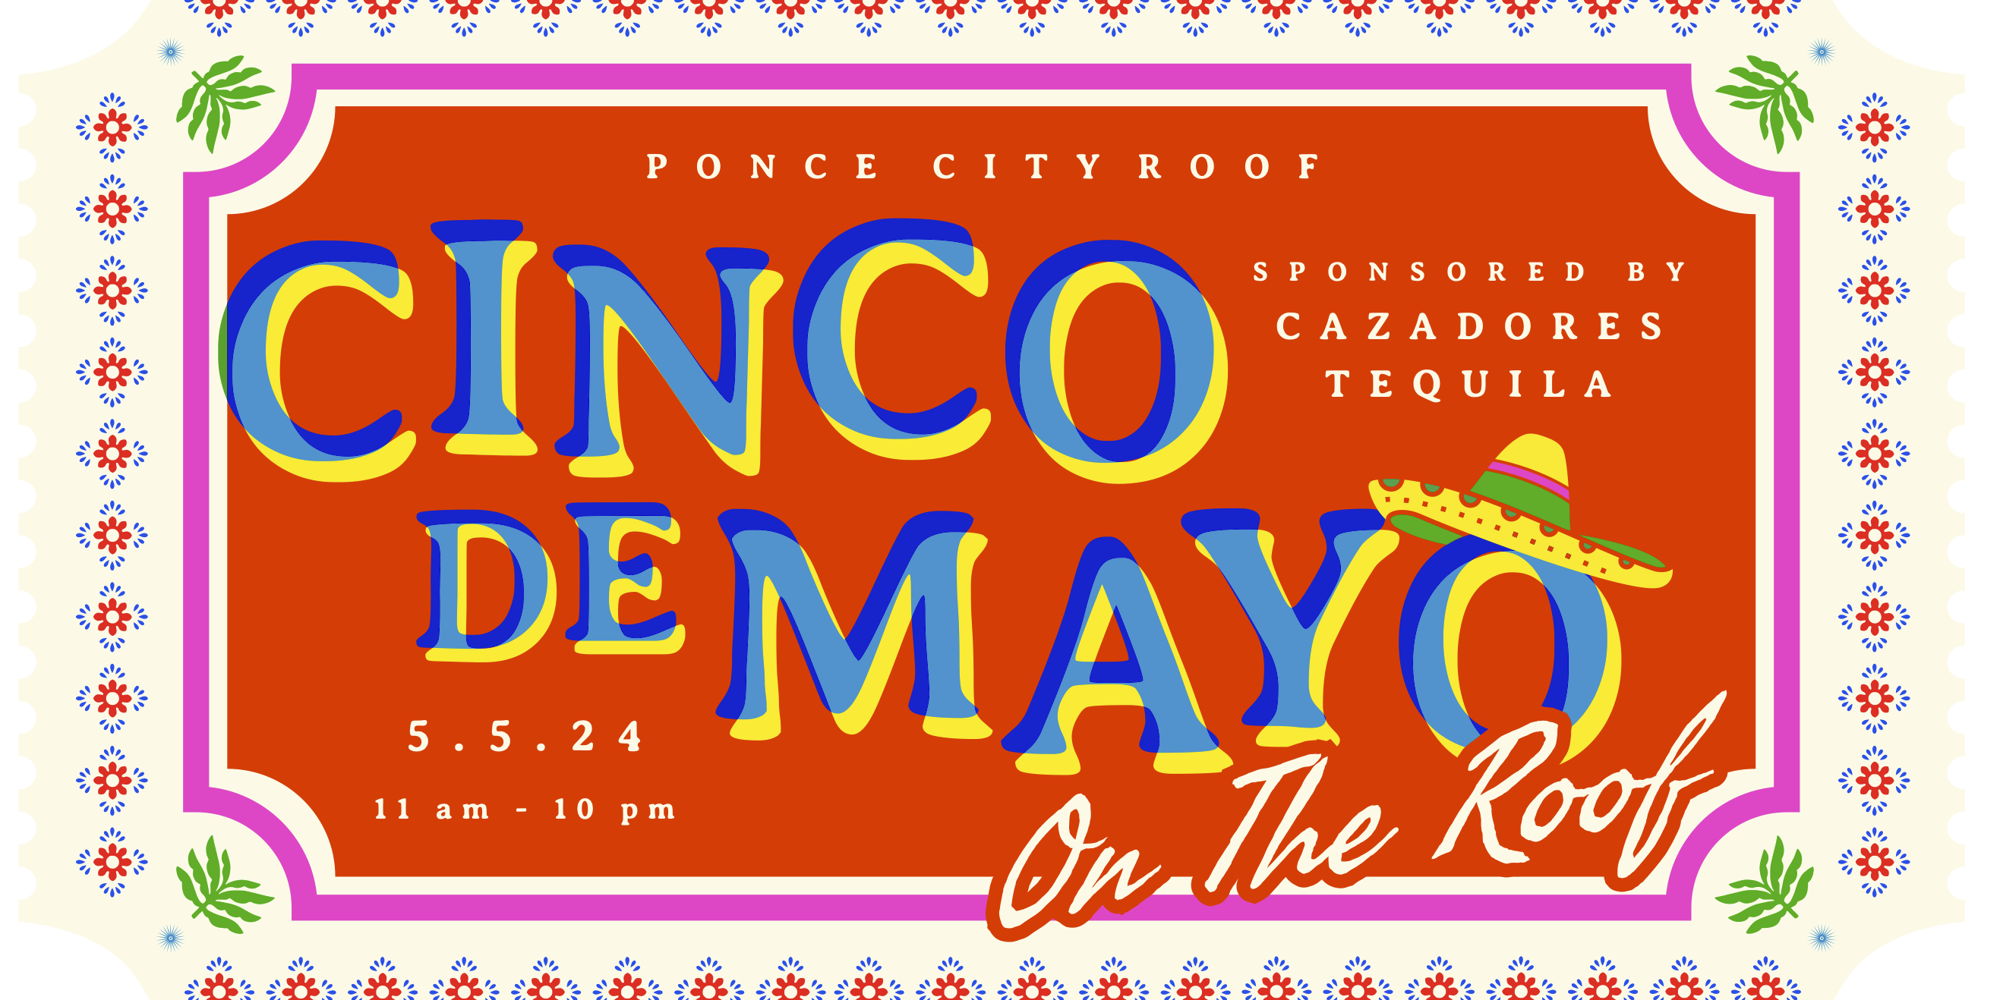 Cinco de Mayo on The Roof promotional image